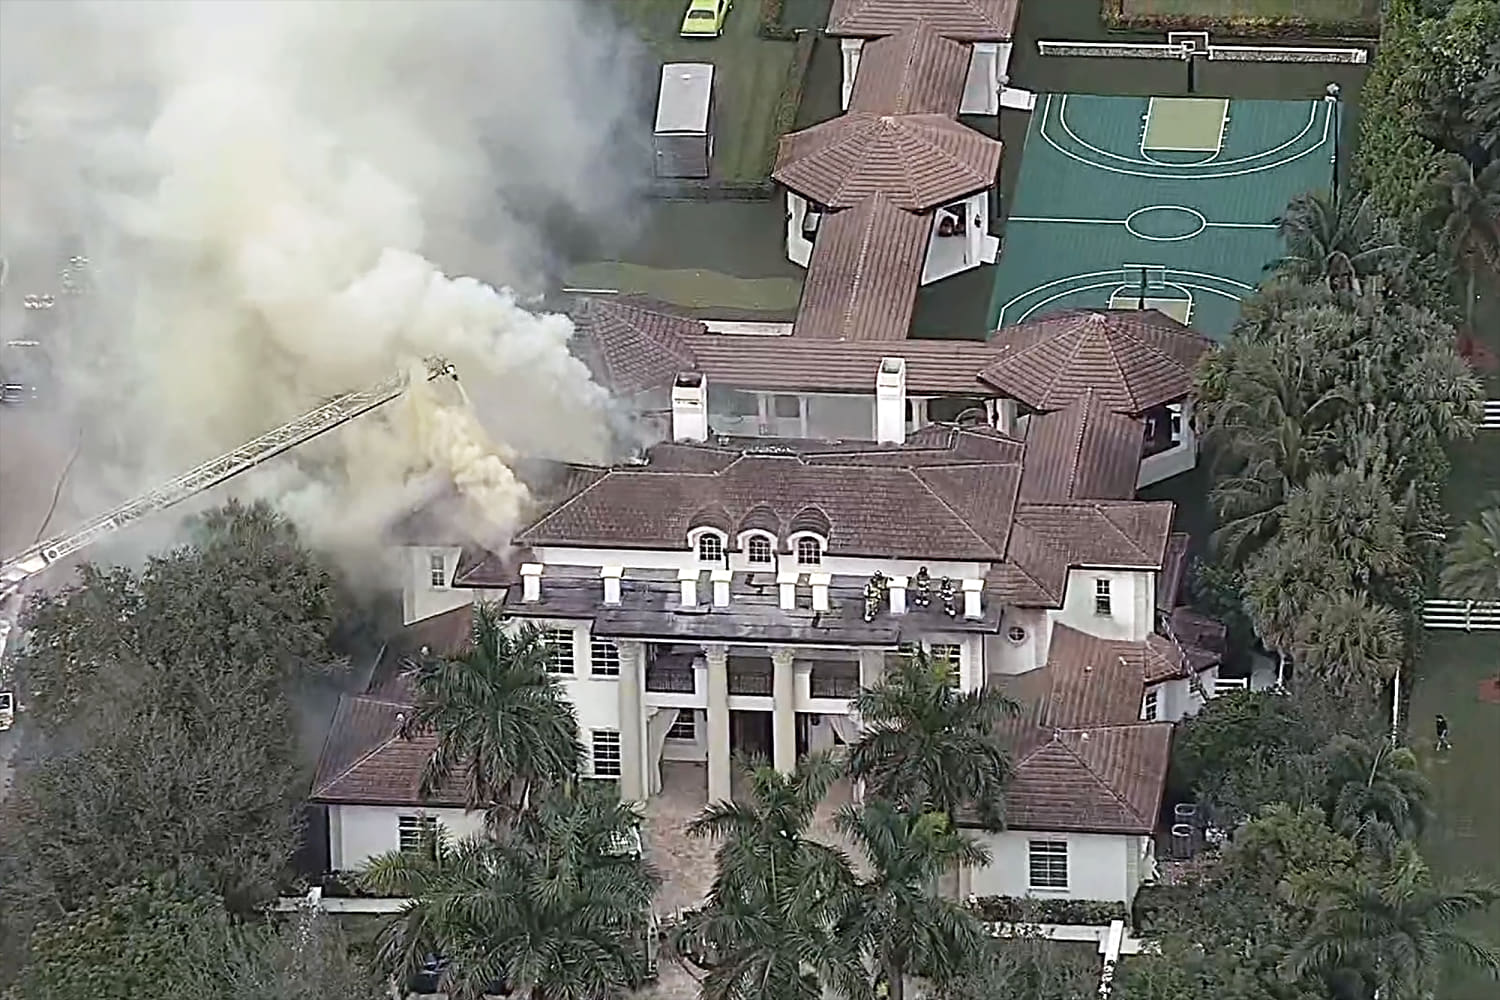 Miami Dolphins star Tyreek Hill's mansion fire sparked by child playing with lighter, officials say